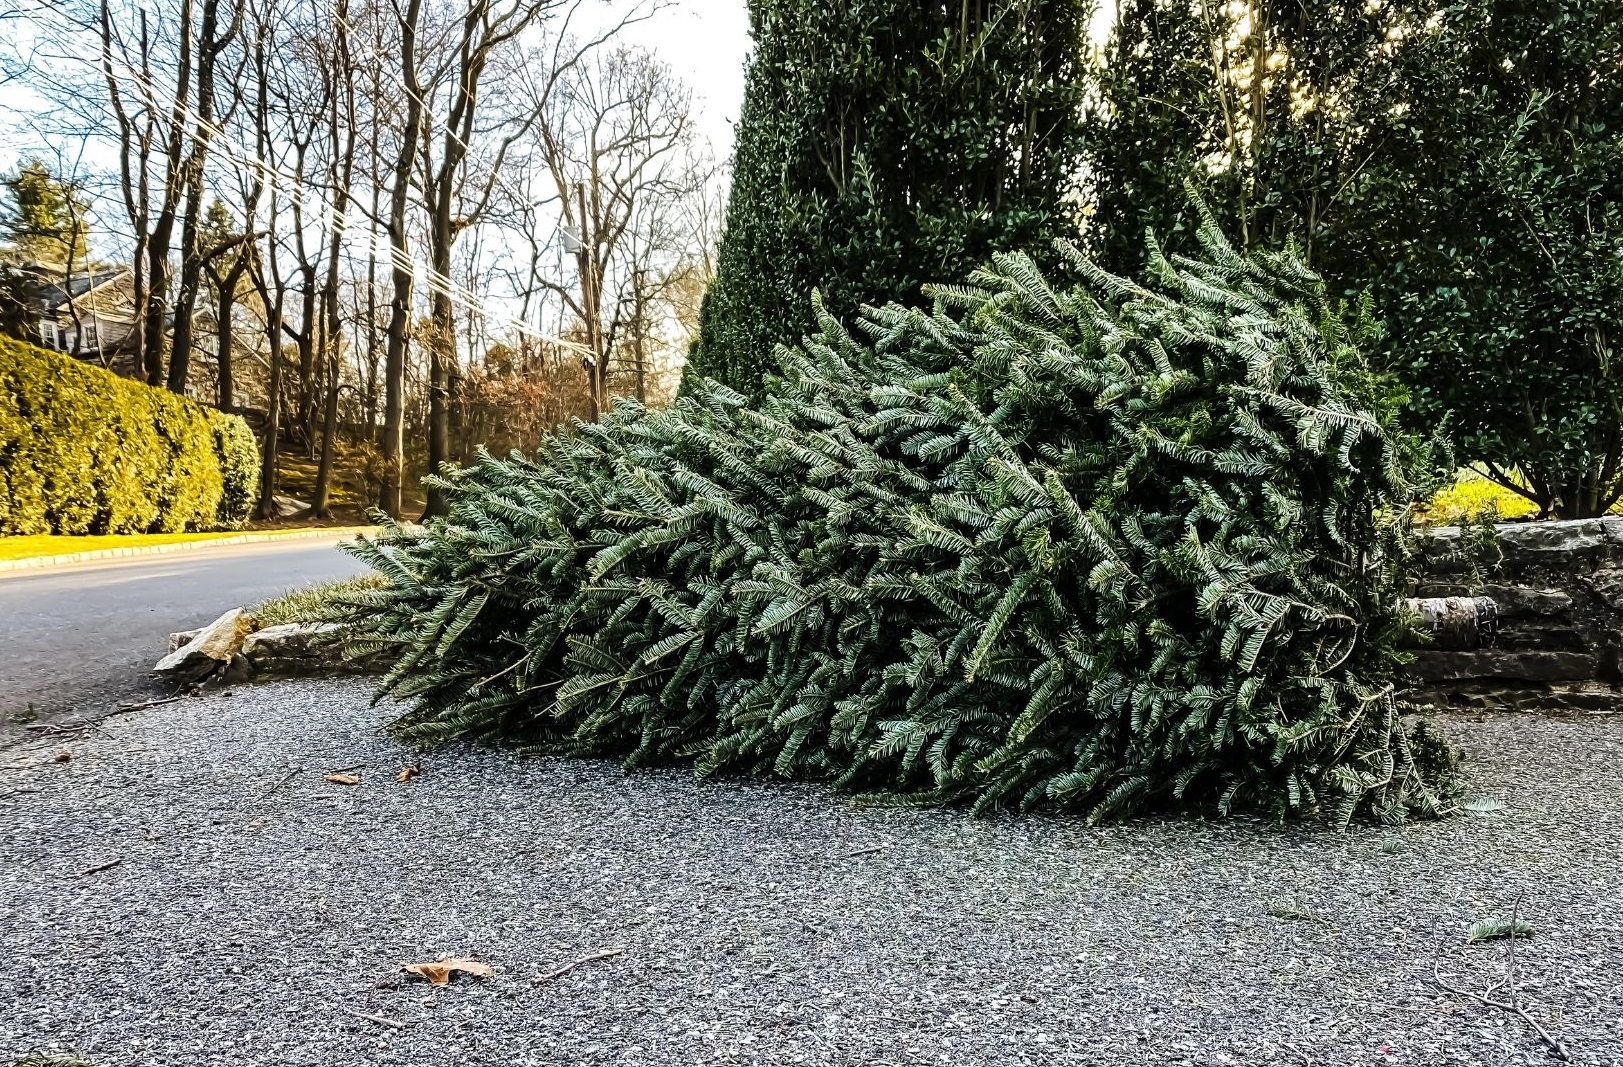 City of Asheville offers guidance for Christmas tree, lights disposal - The City of Asheville